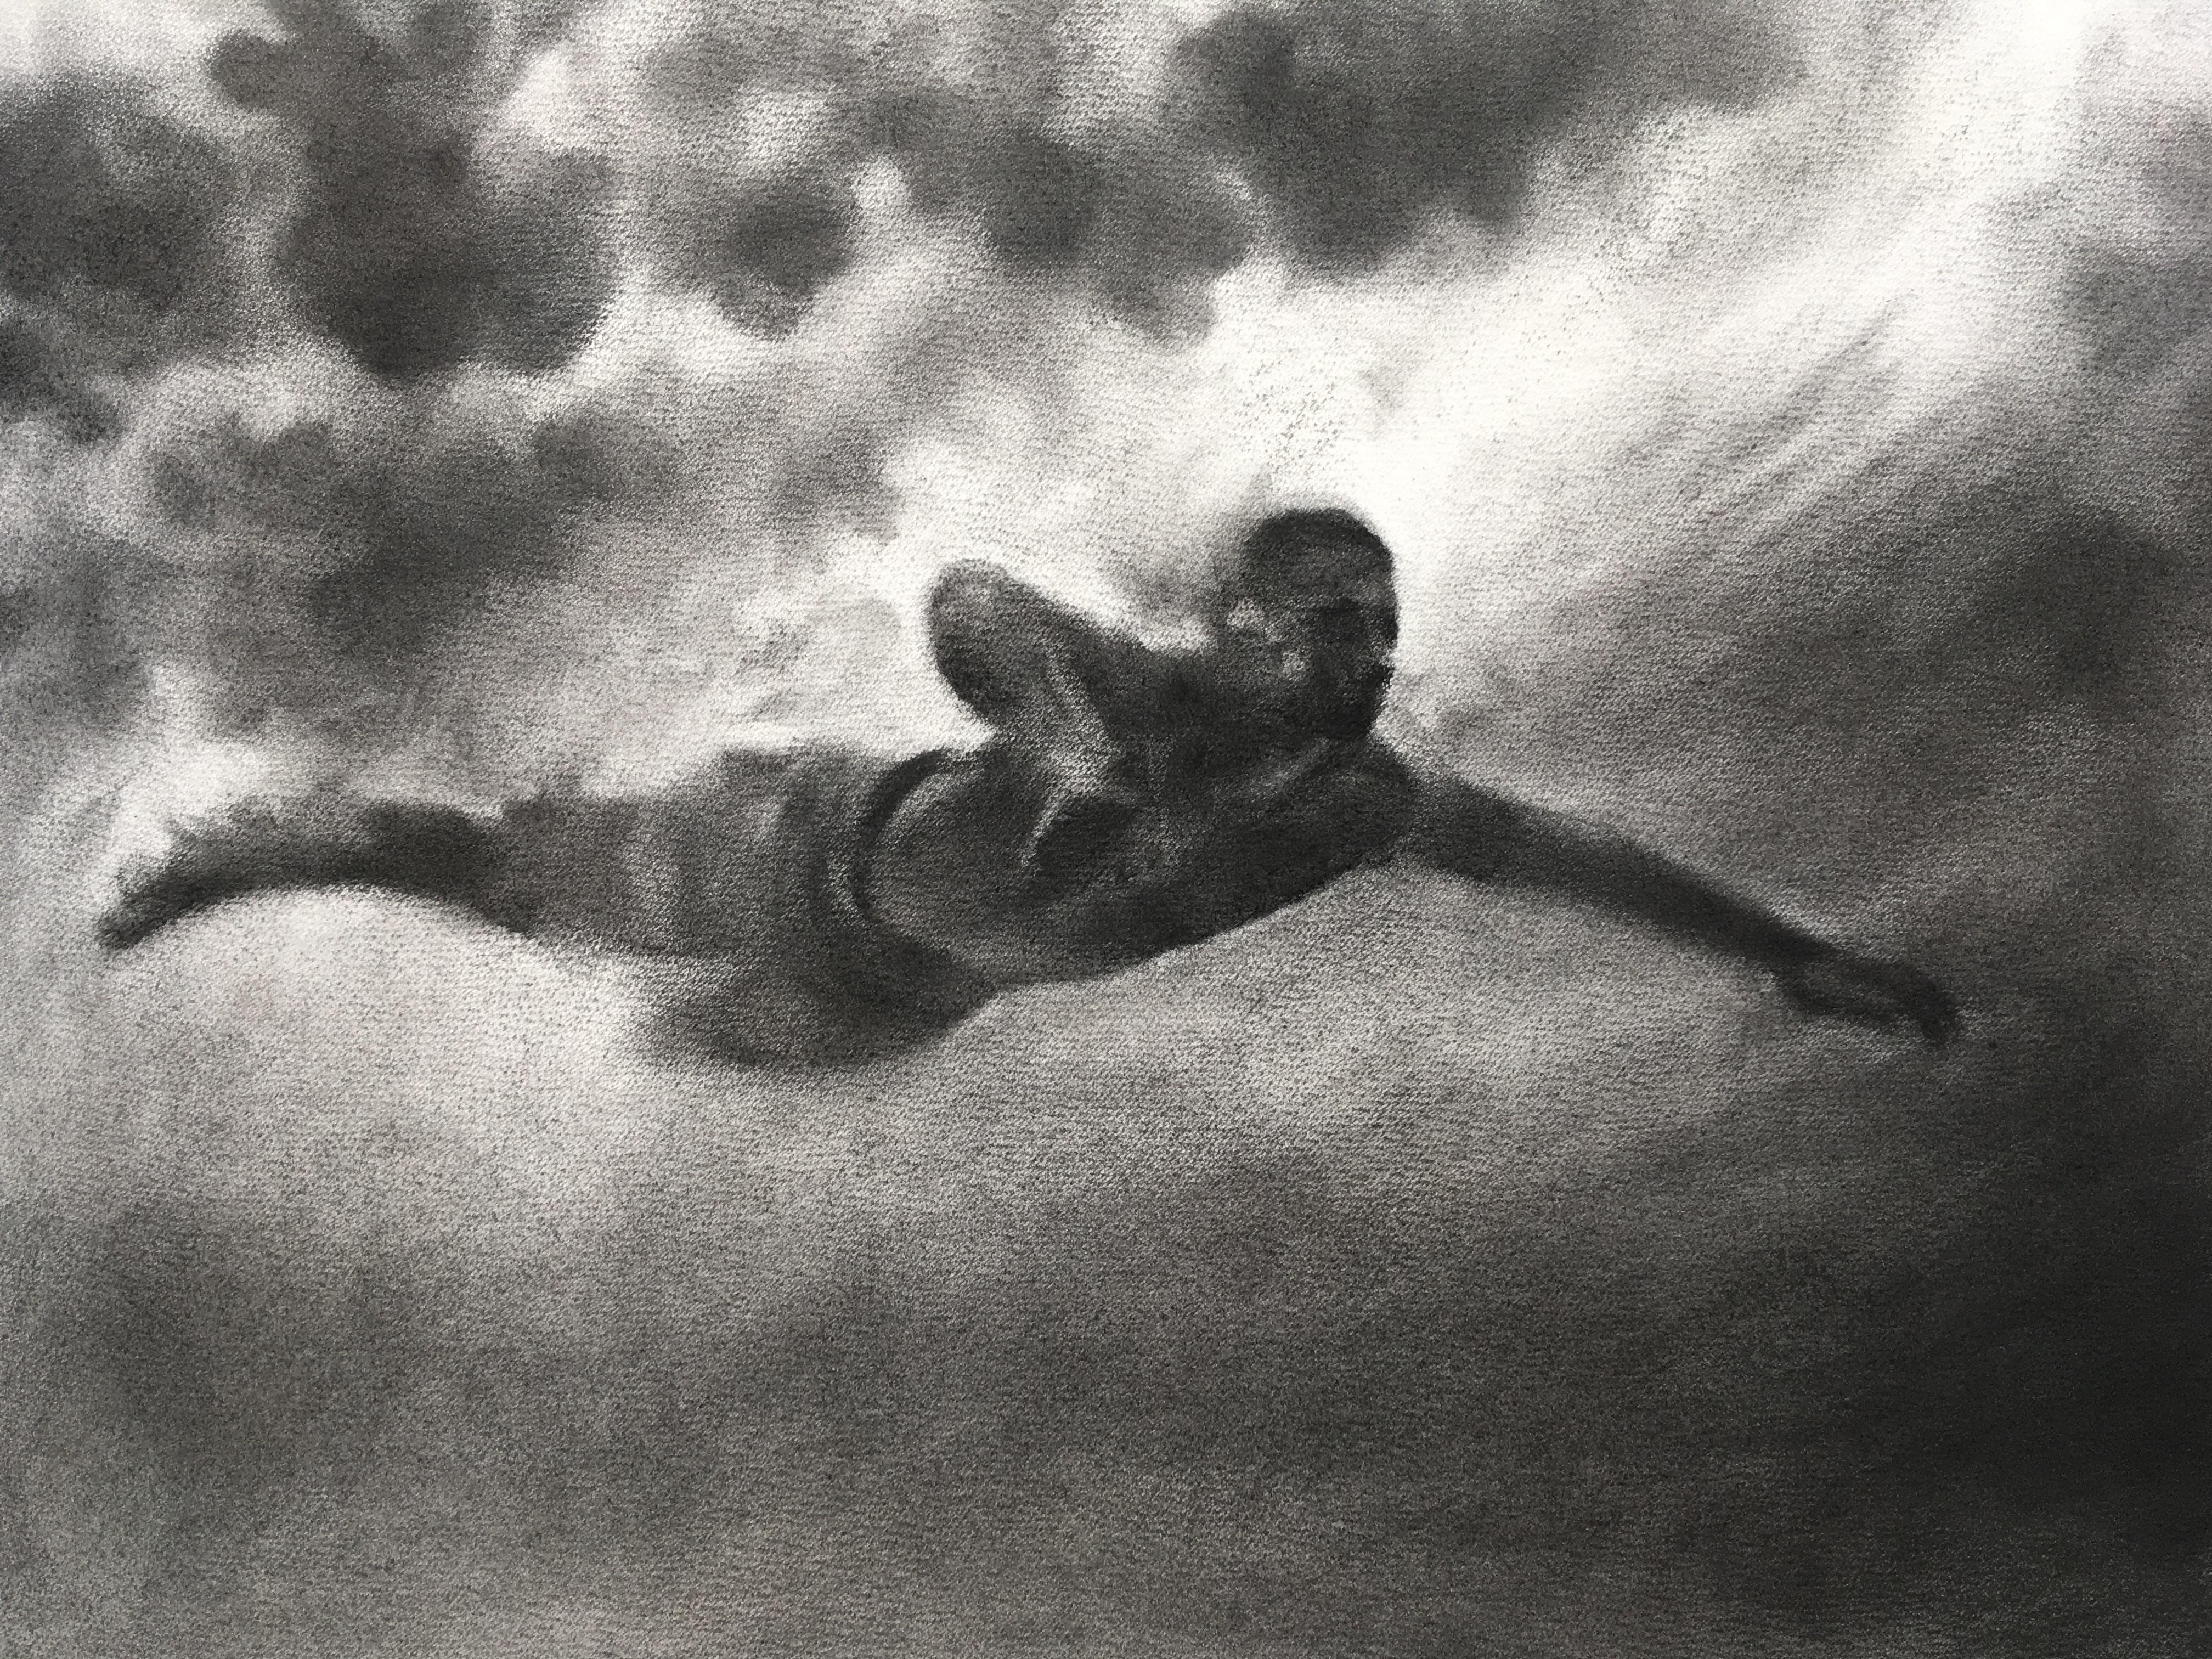 underwater charcoal drawing